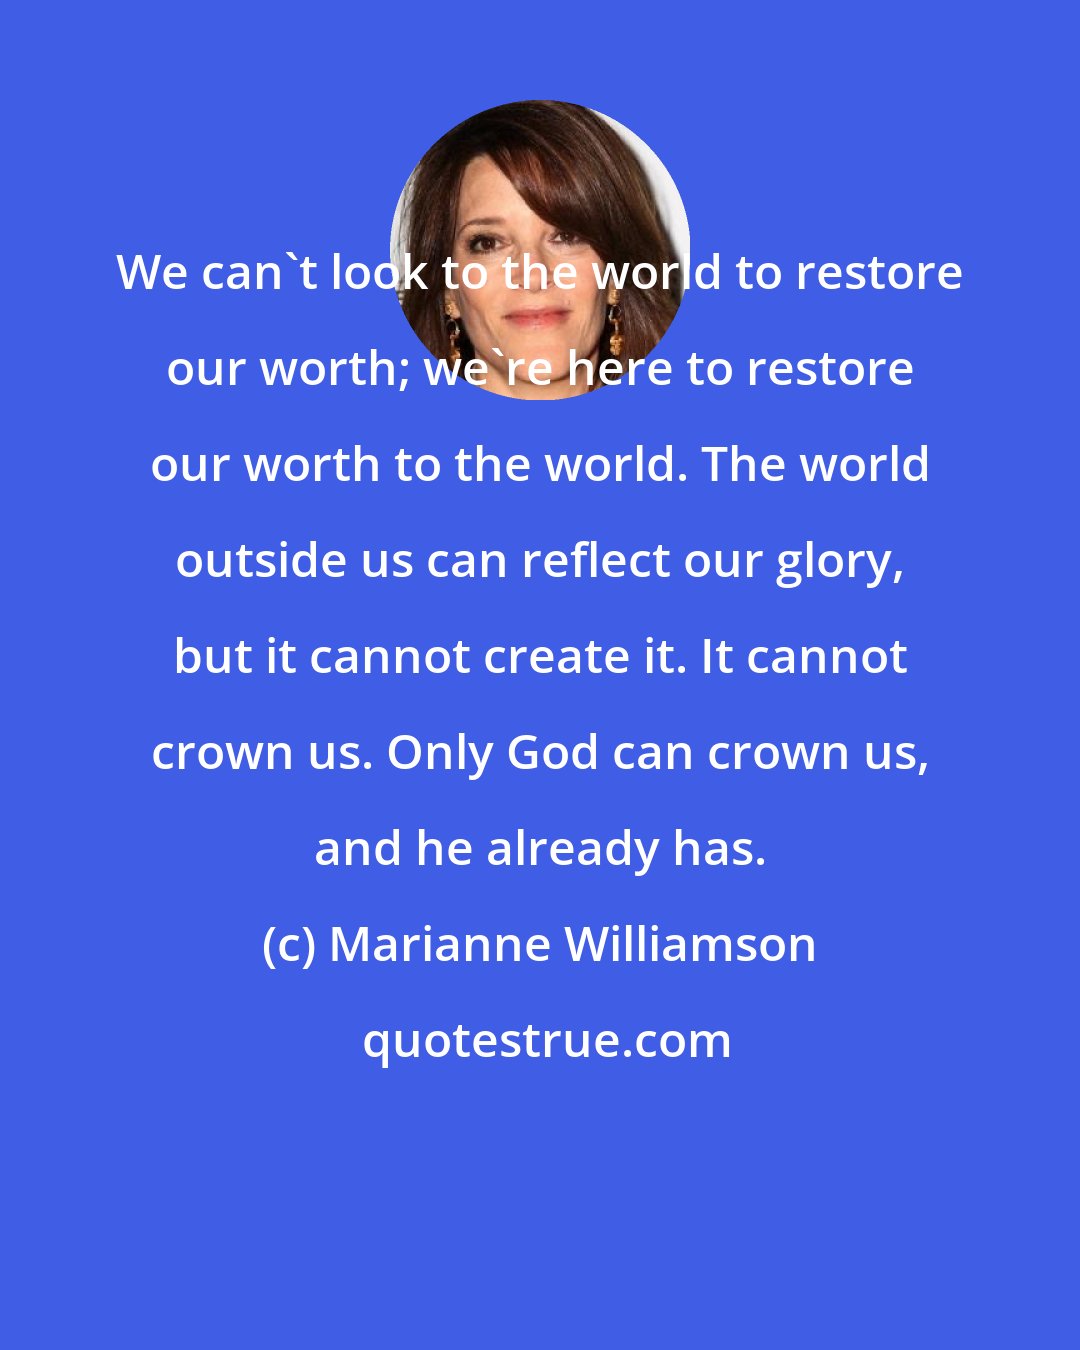 Marianne Williamson: We can't look to the world to restore our worth; we're here to restore our worth to the world. The world outside us can reflect our glory, but it cannot create it. It cannot crown us. Only God can crown us, and he already has.